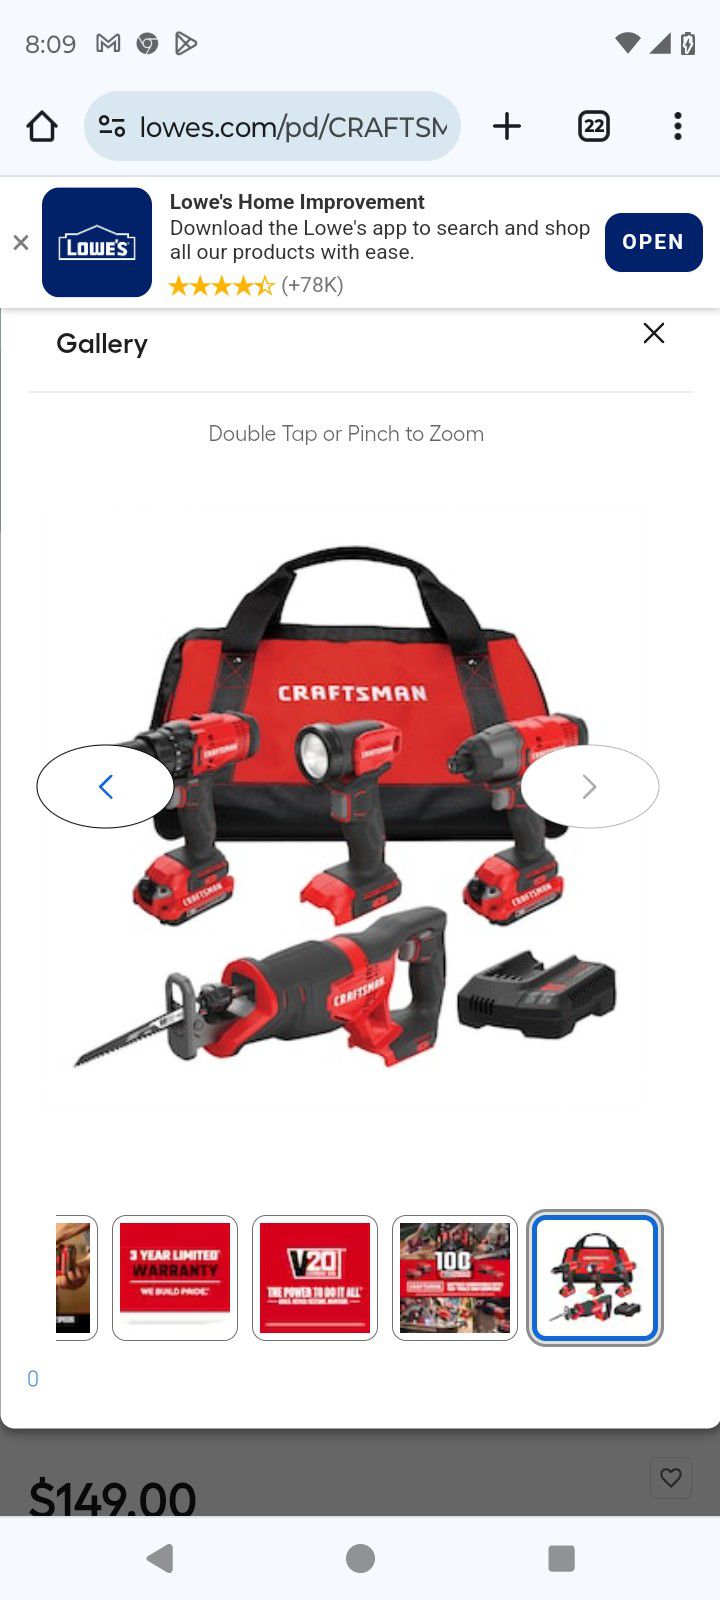 CRAFTSMAN V20 4-Tool Power Tool Combo Kit with Soft Case (2-Batteries Included and Charger Included)

